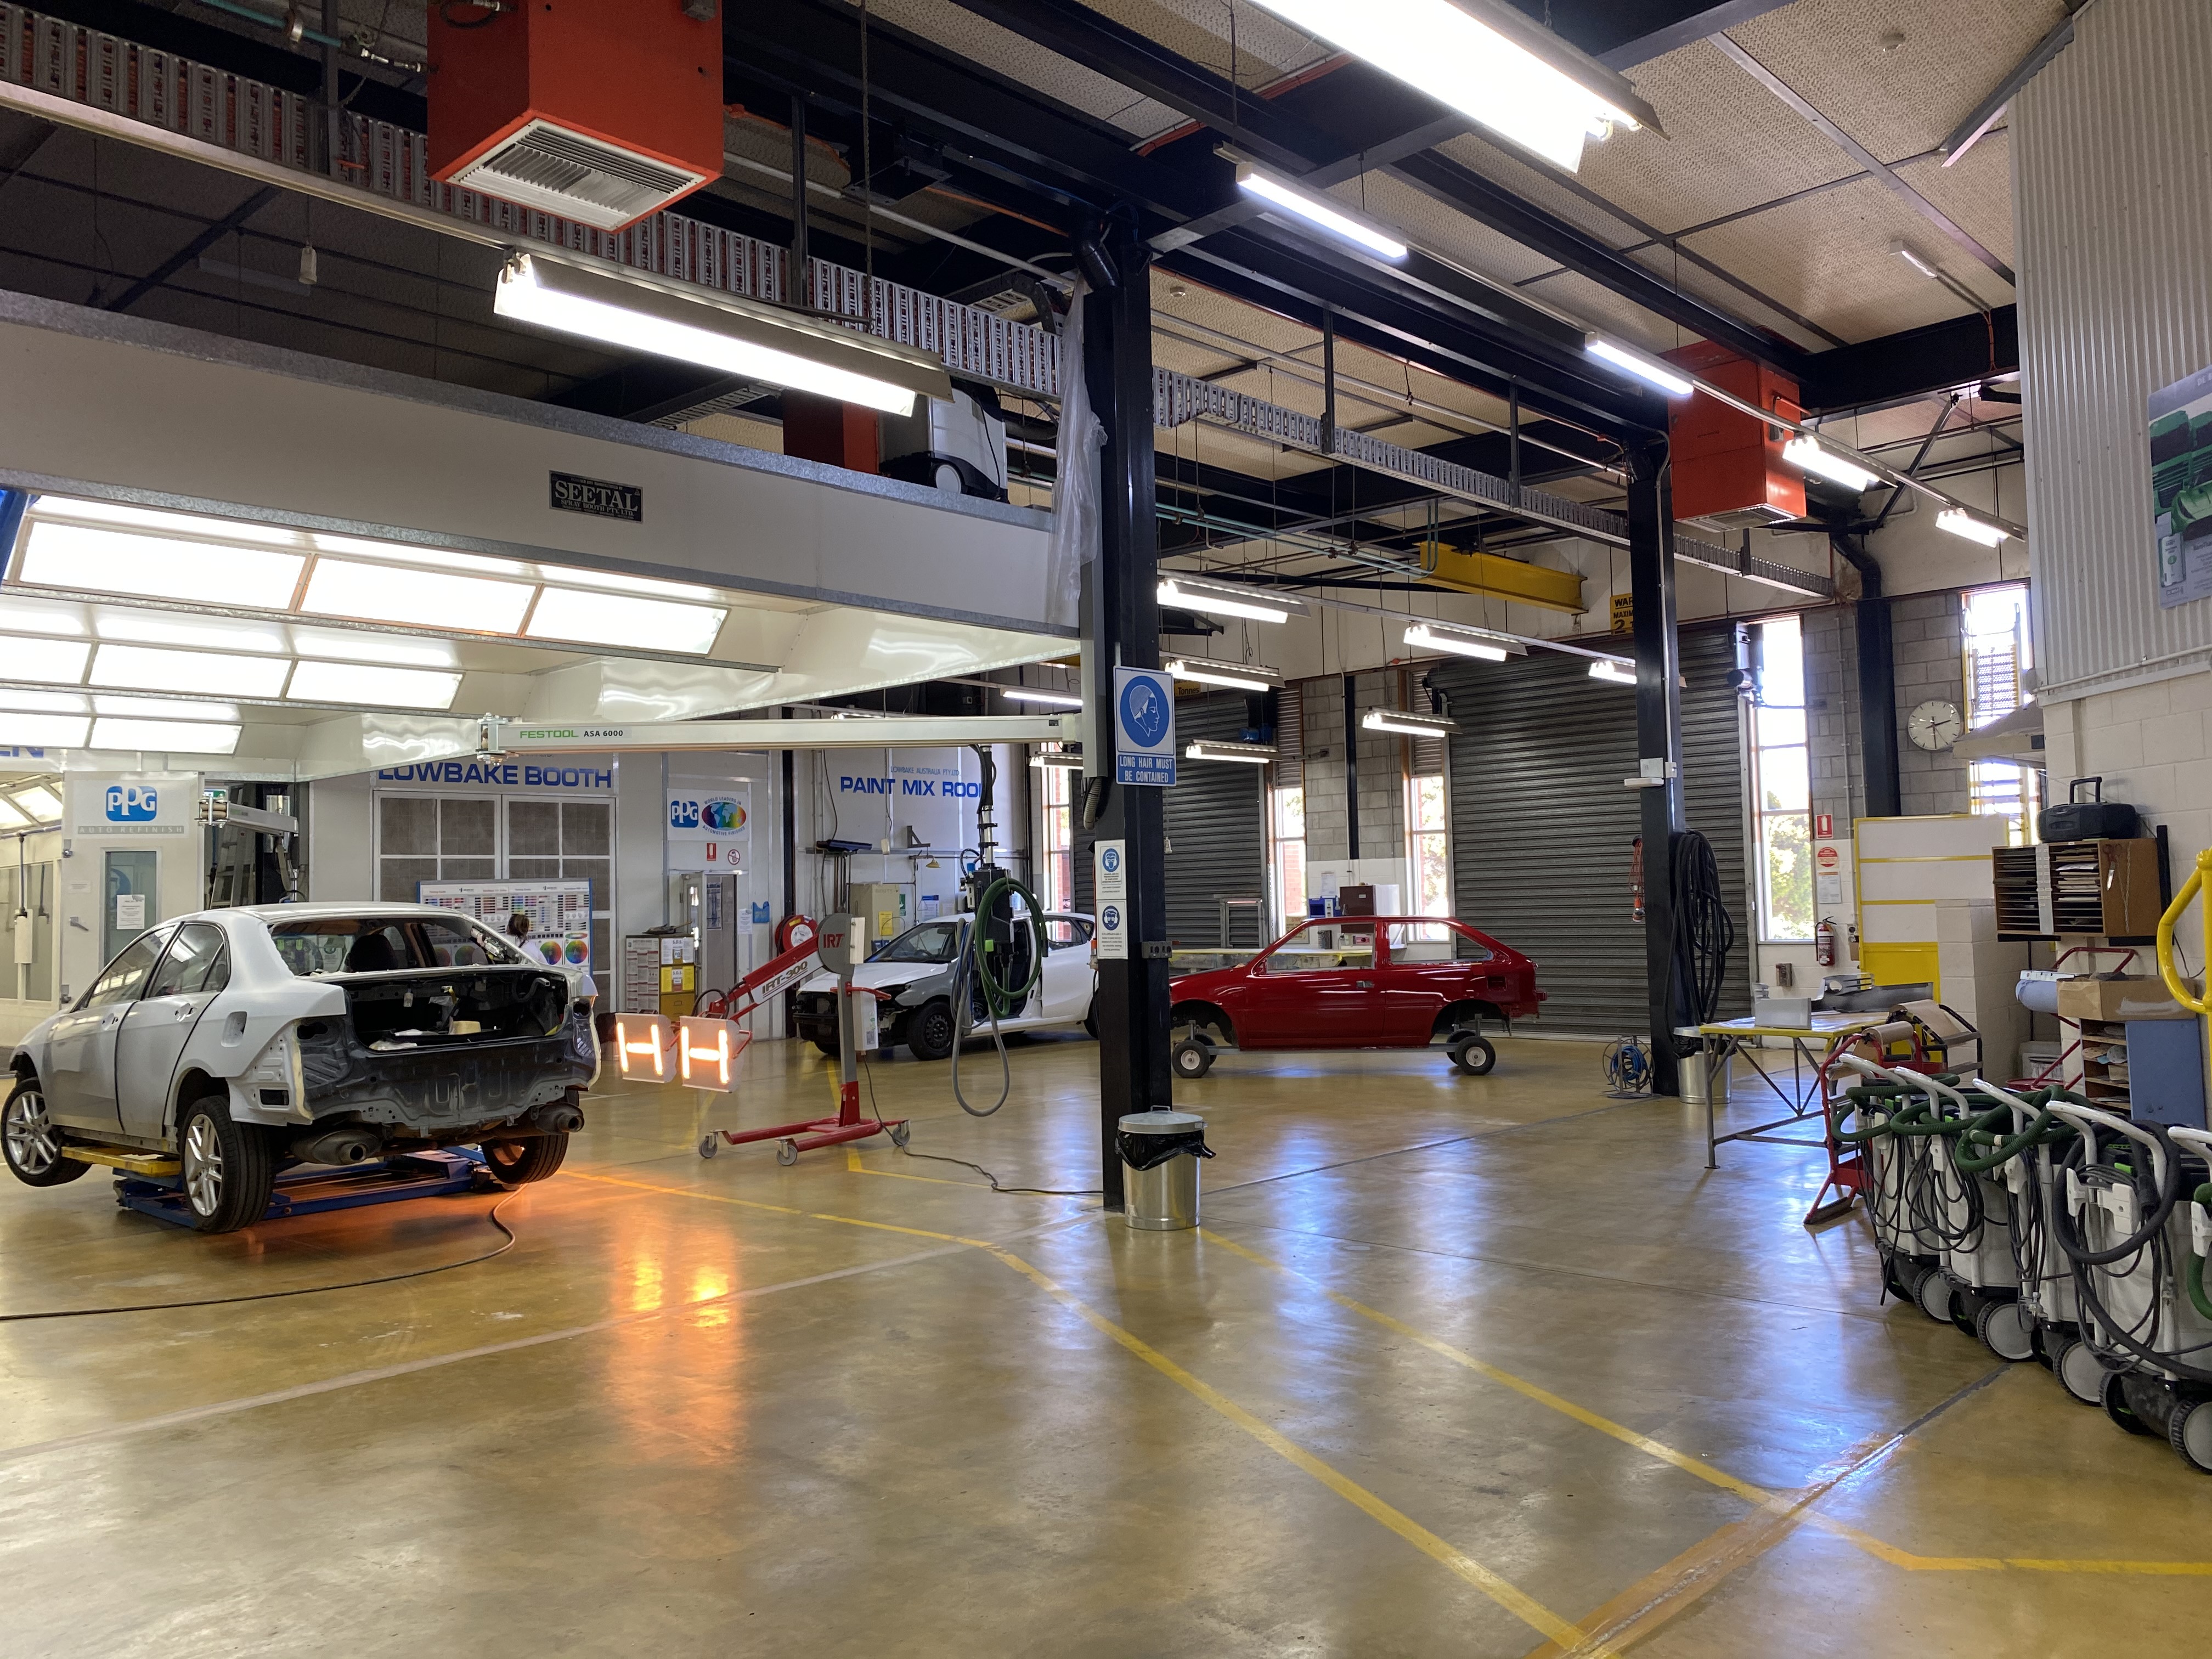 Automotive workshop with cars on  jacks and spray paint booths in the background